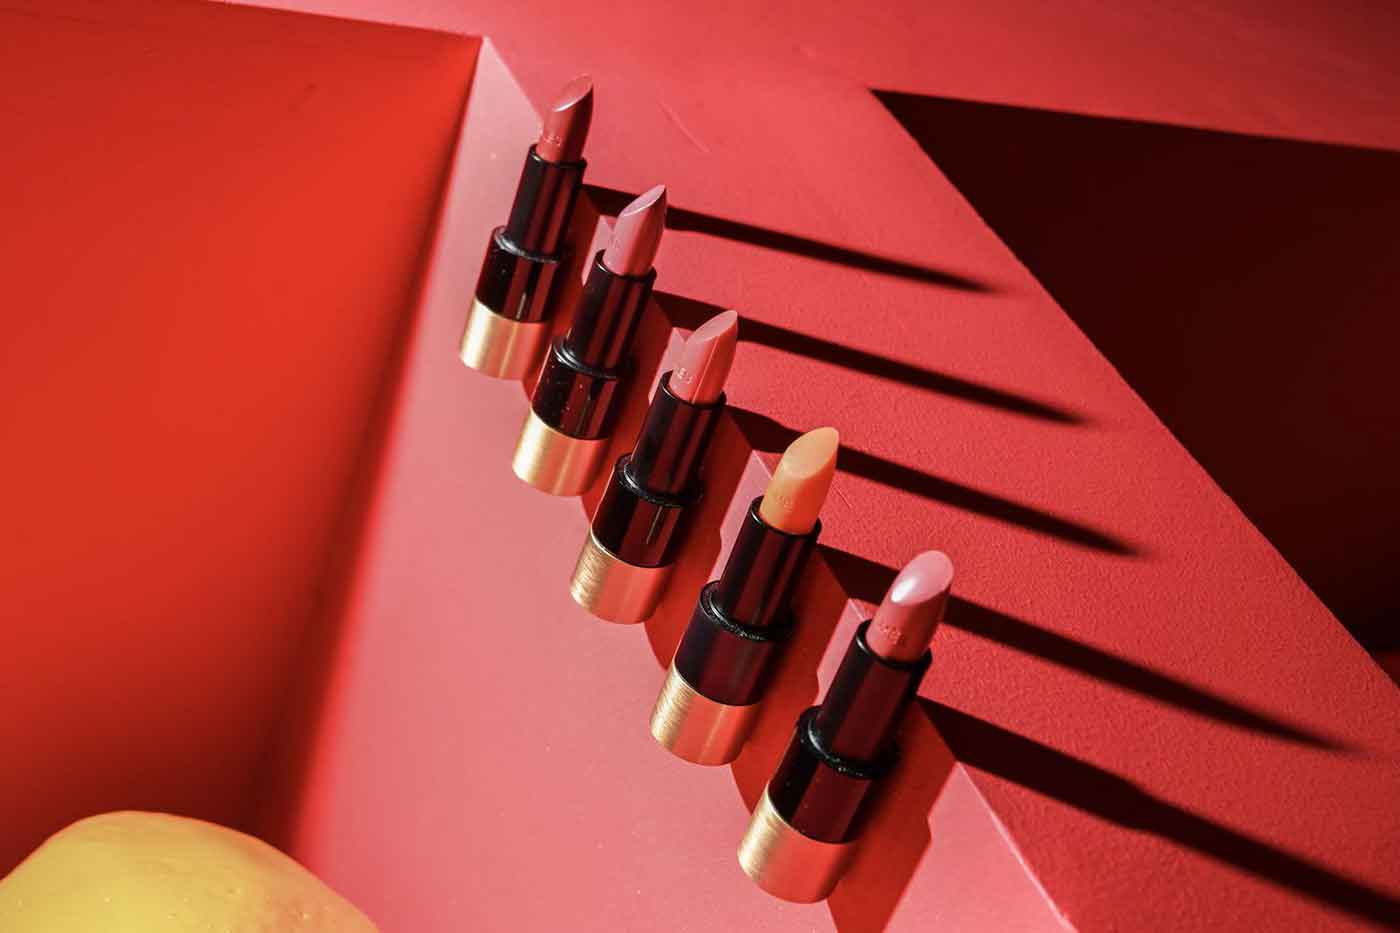 Hermès Beauty introduces lipsticks in India inspired by Rajasthan